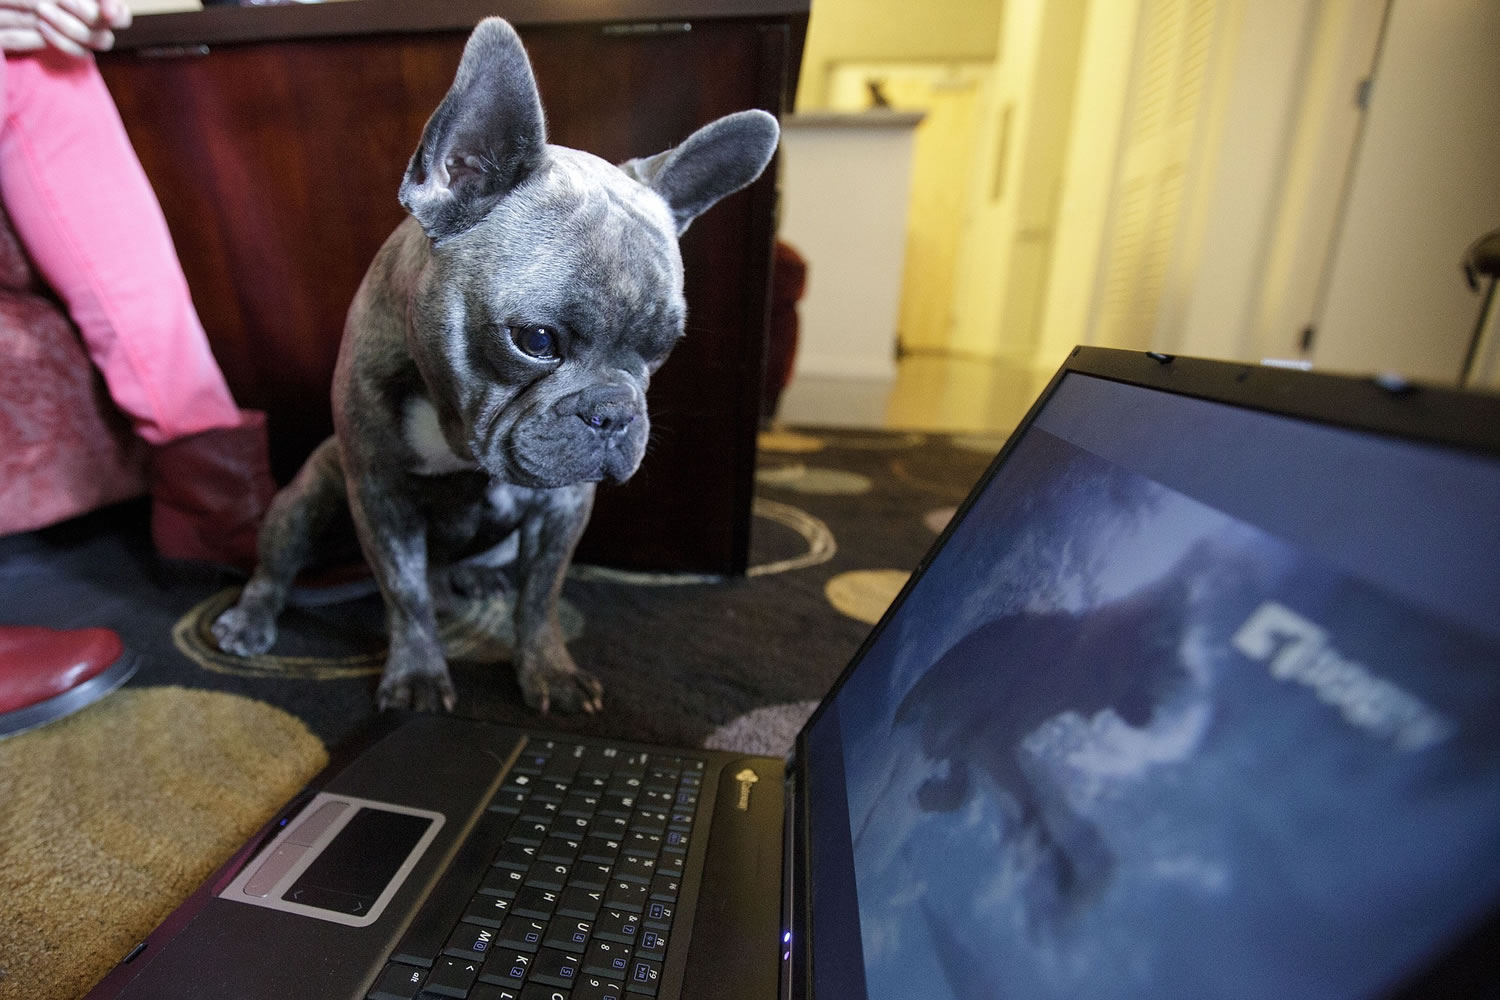 Bleu, a French bulldog owned by Maria Catania, watches DogTV in her apartment April 7, 2012, in San Diego. Grammy-winning musician Andrew Dost of the indie rock band fun.